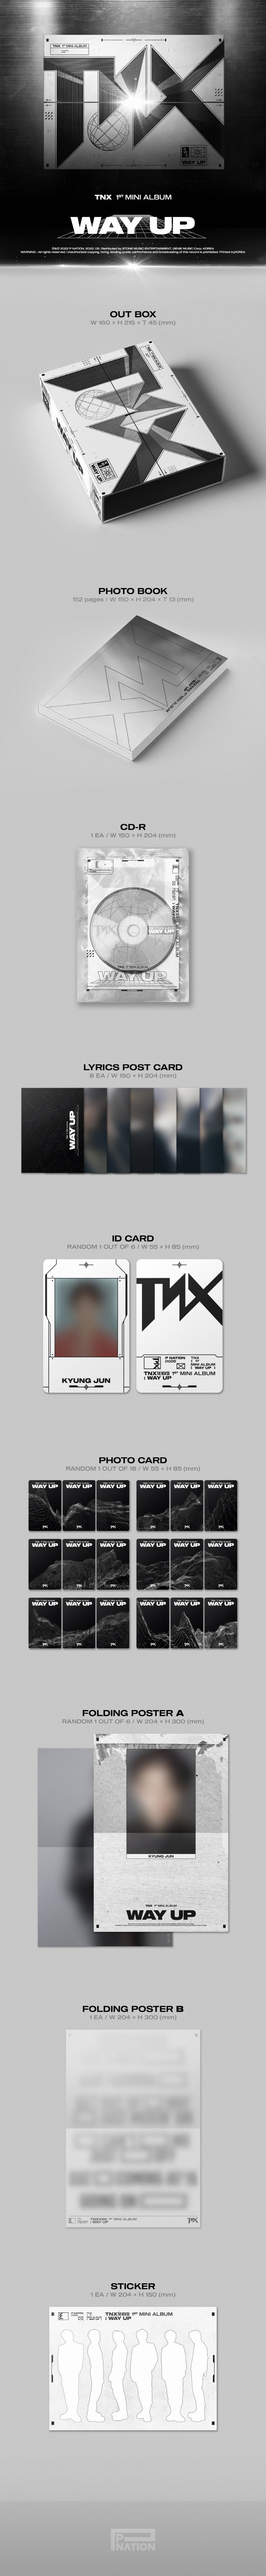 1 CD
1 Photo Book (152 pages)
8 Lyrics Post Cards
1 ID Card (random out of 6 types)
1 Photo Card (random out of 18 types)
...